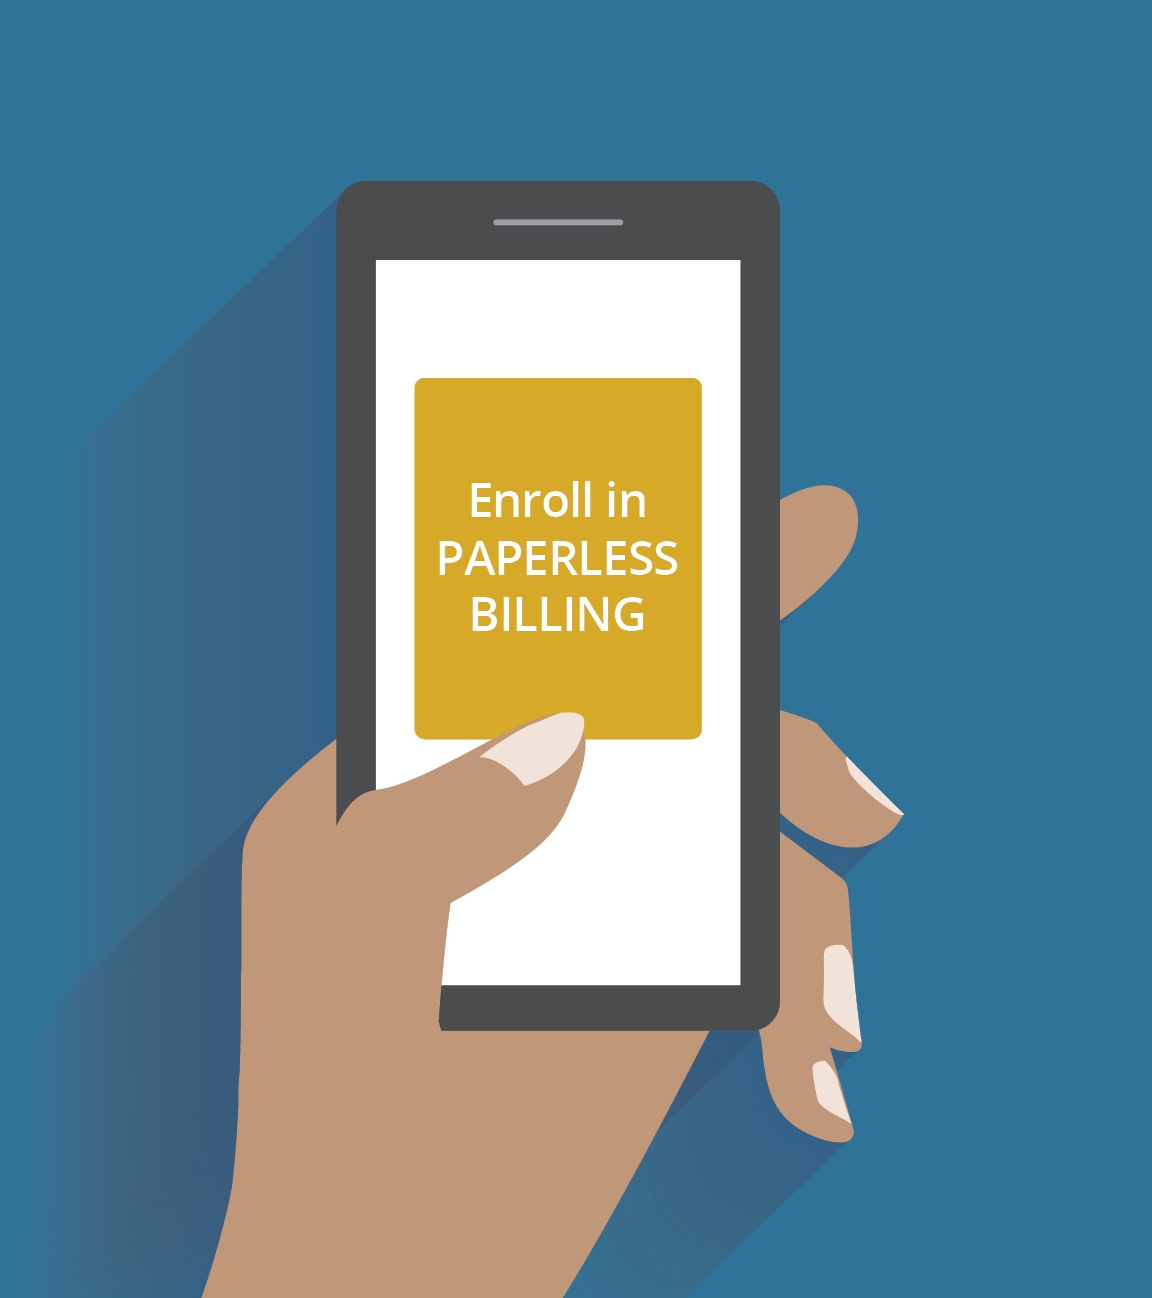 Illustrated hand holding mobile phone that says Enroll in paperless billing